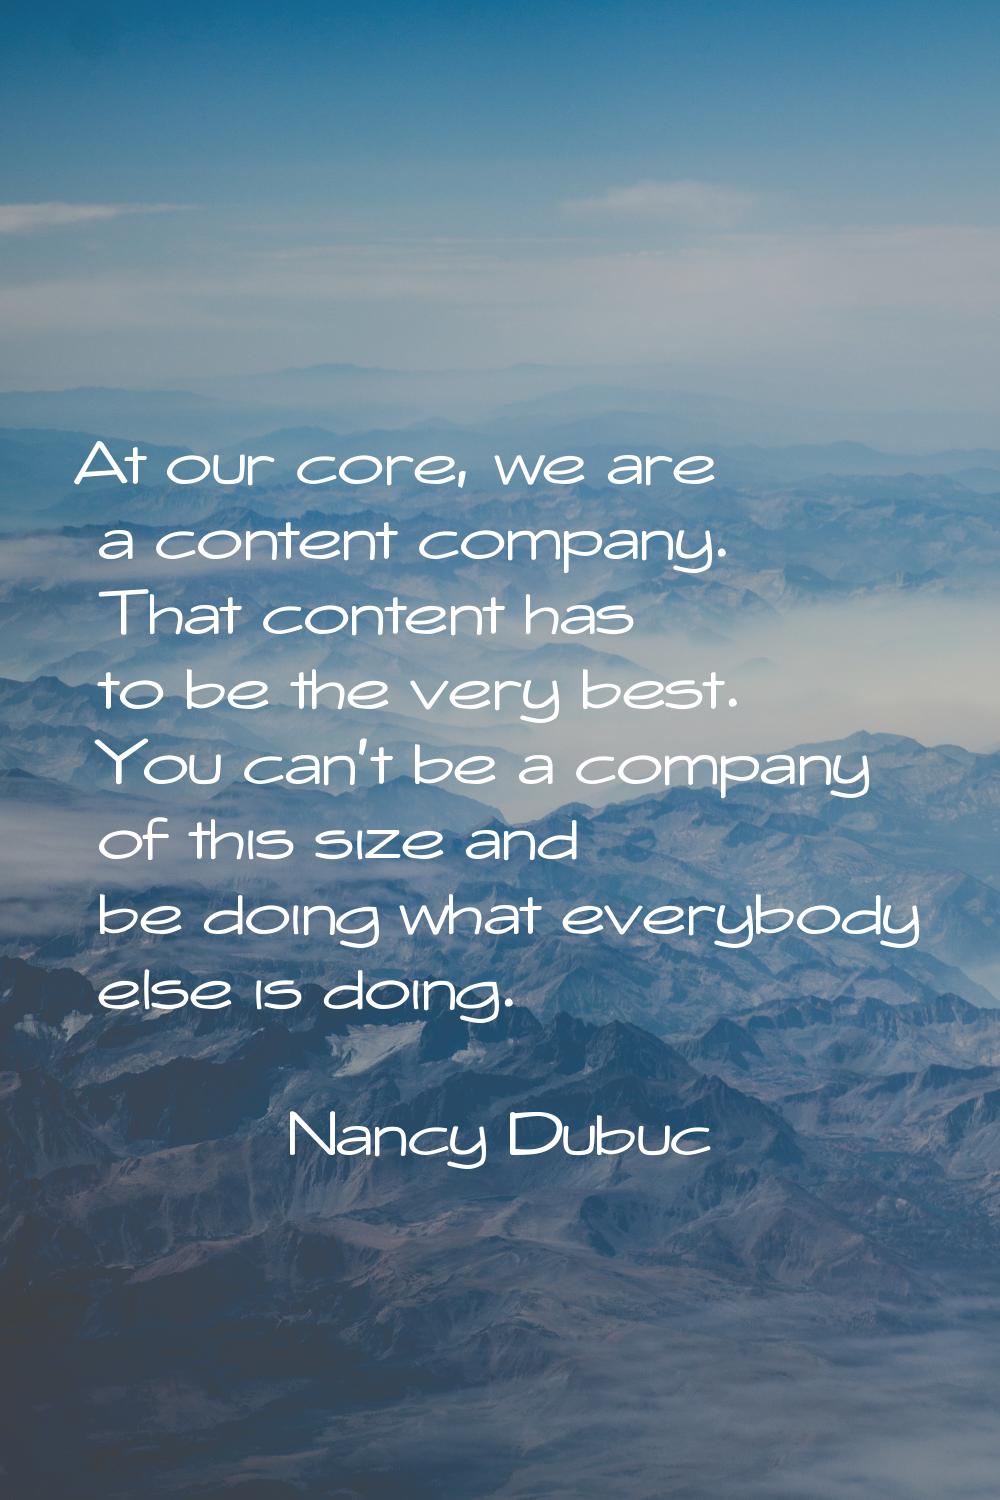 At our core, we are a content company. That content has to be the very best. You can't be a company